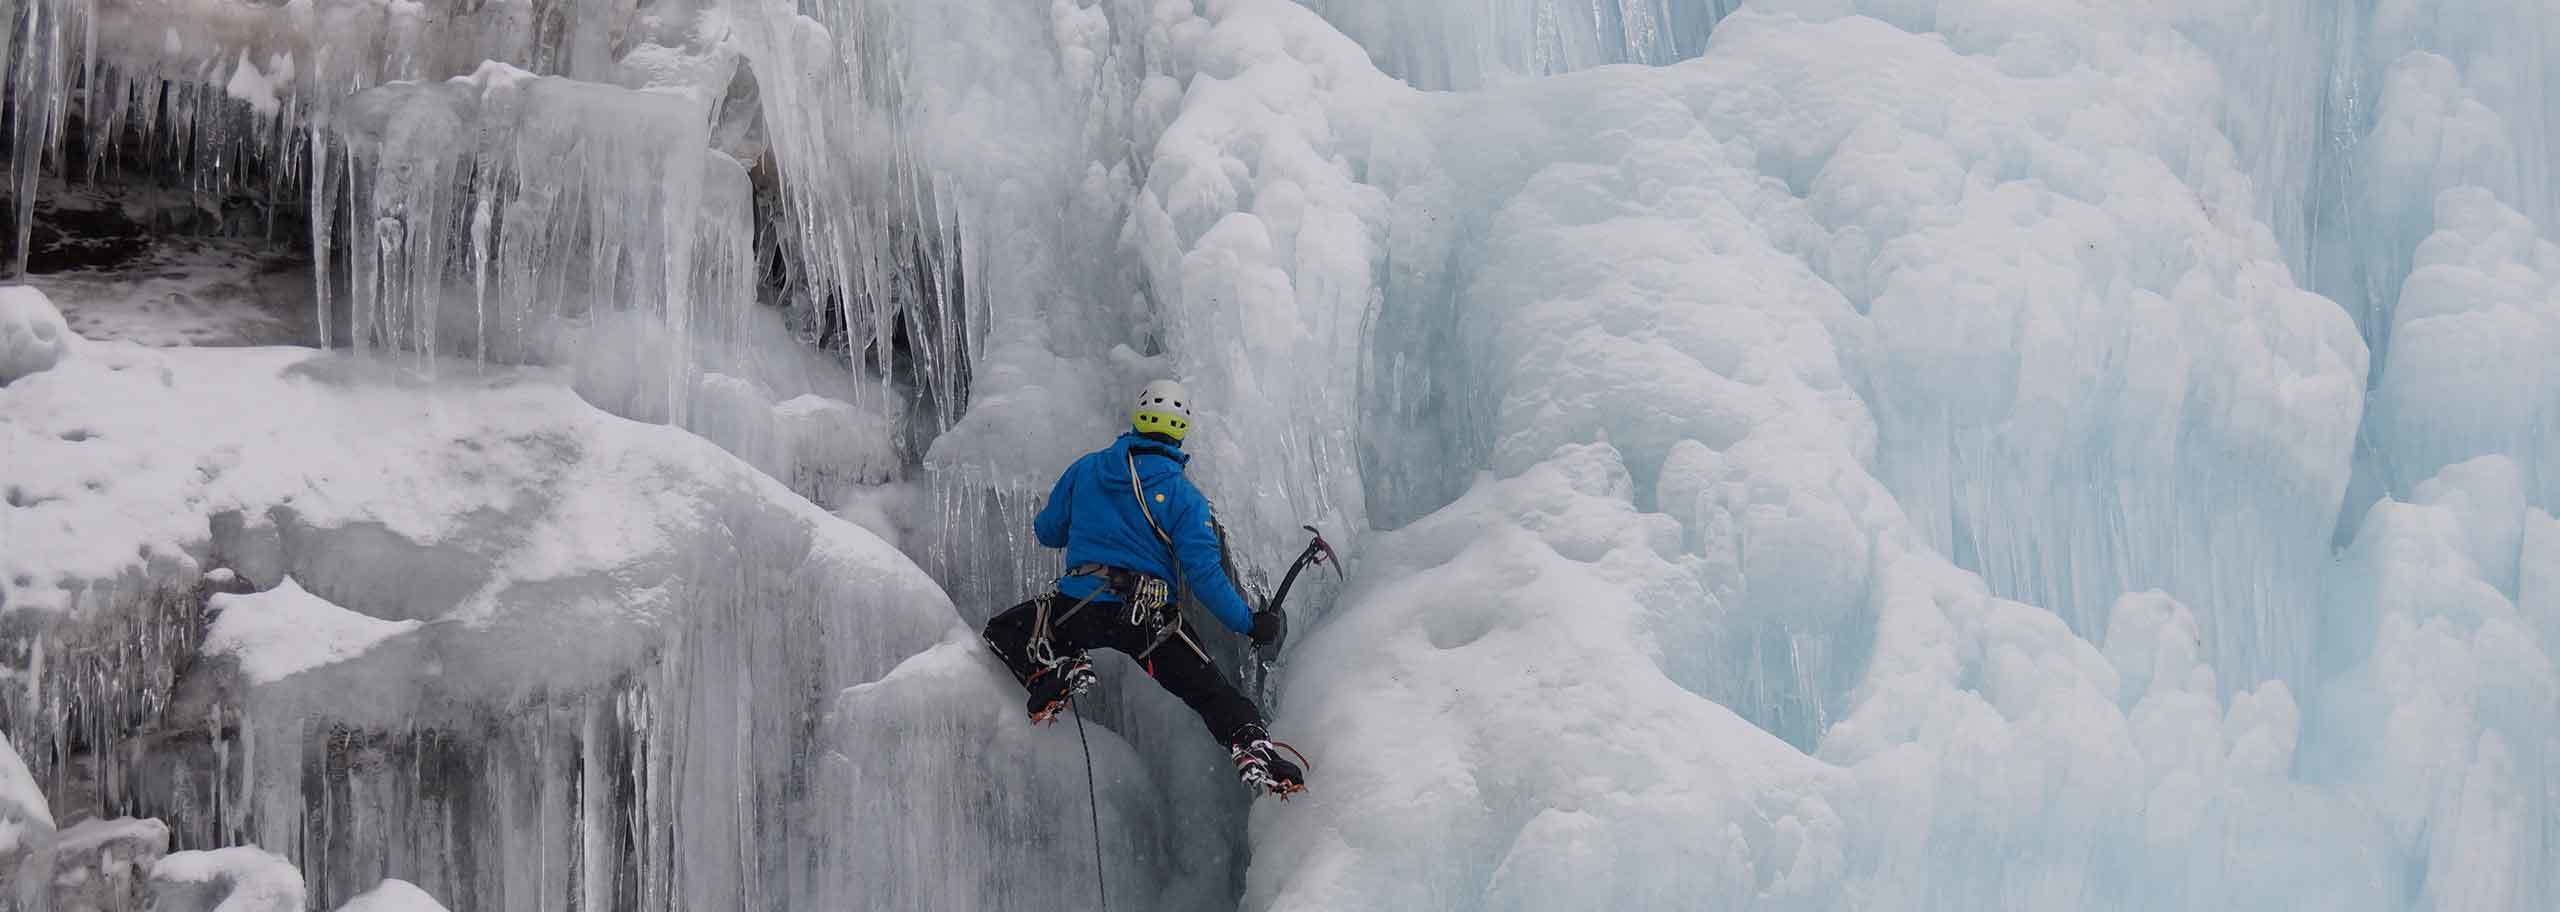 Ice Climbing in Ponte di Legno Tonale, Icefalls with a Mountain Guide